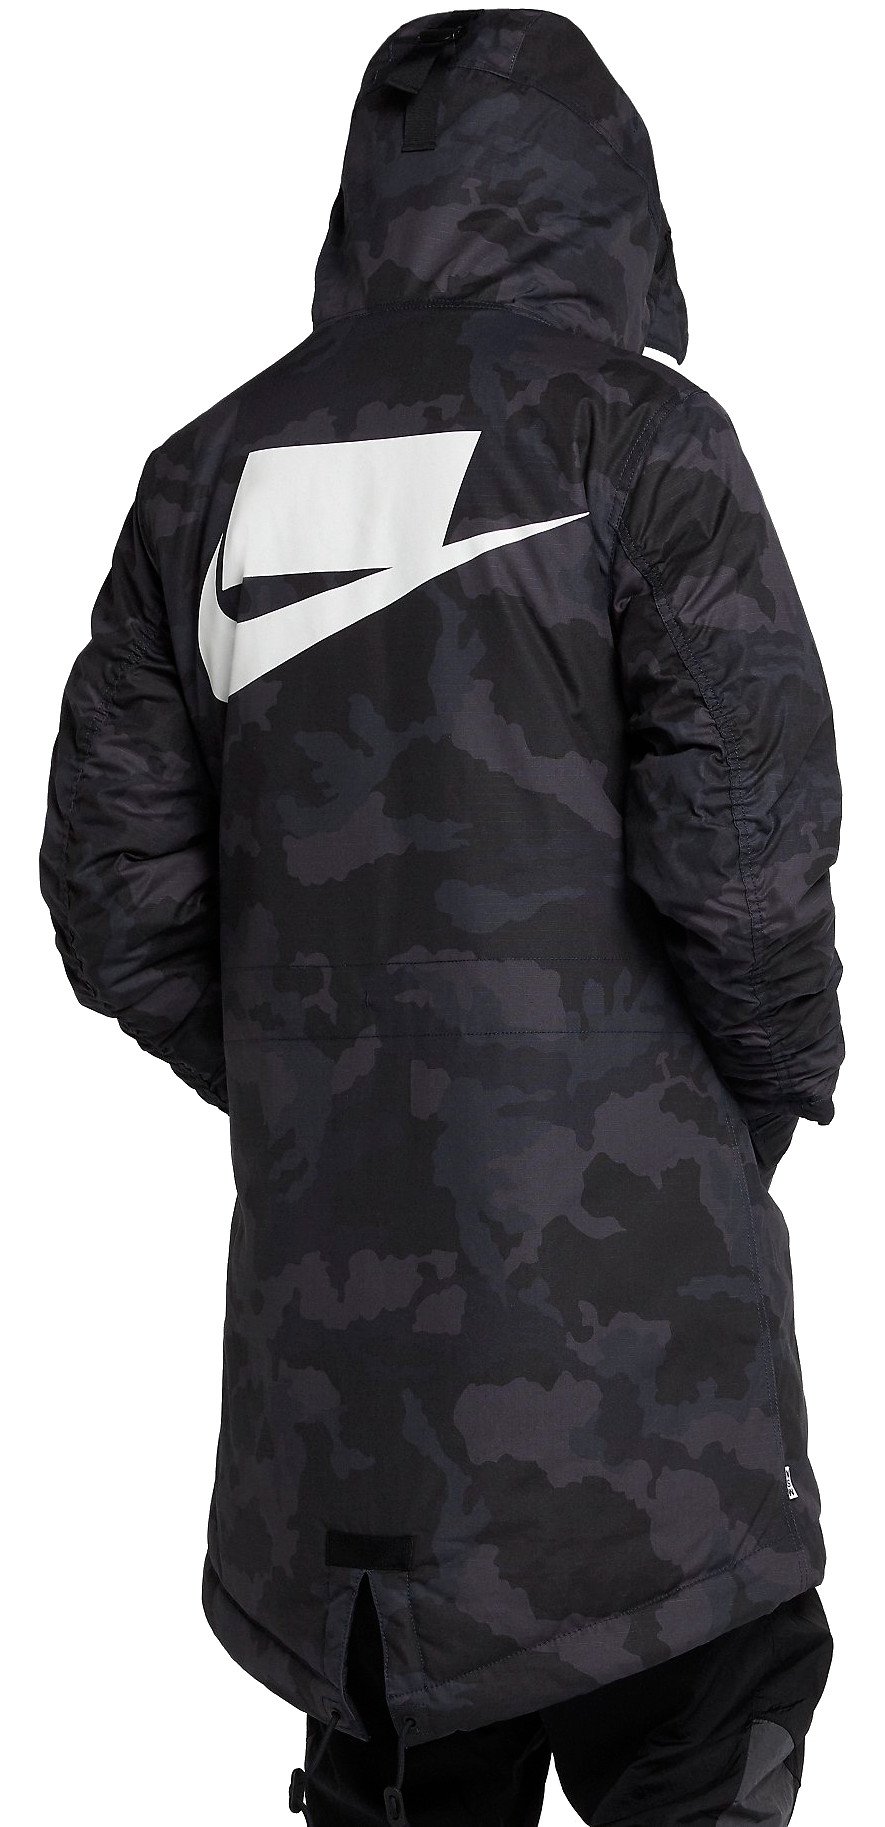 Hooded jacket Nike M NSW NSP SYN FILL PRKA - Top4Running.com